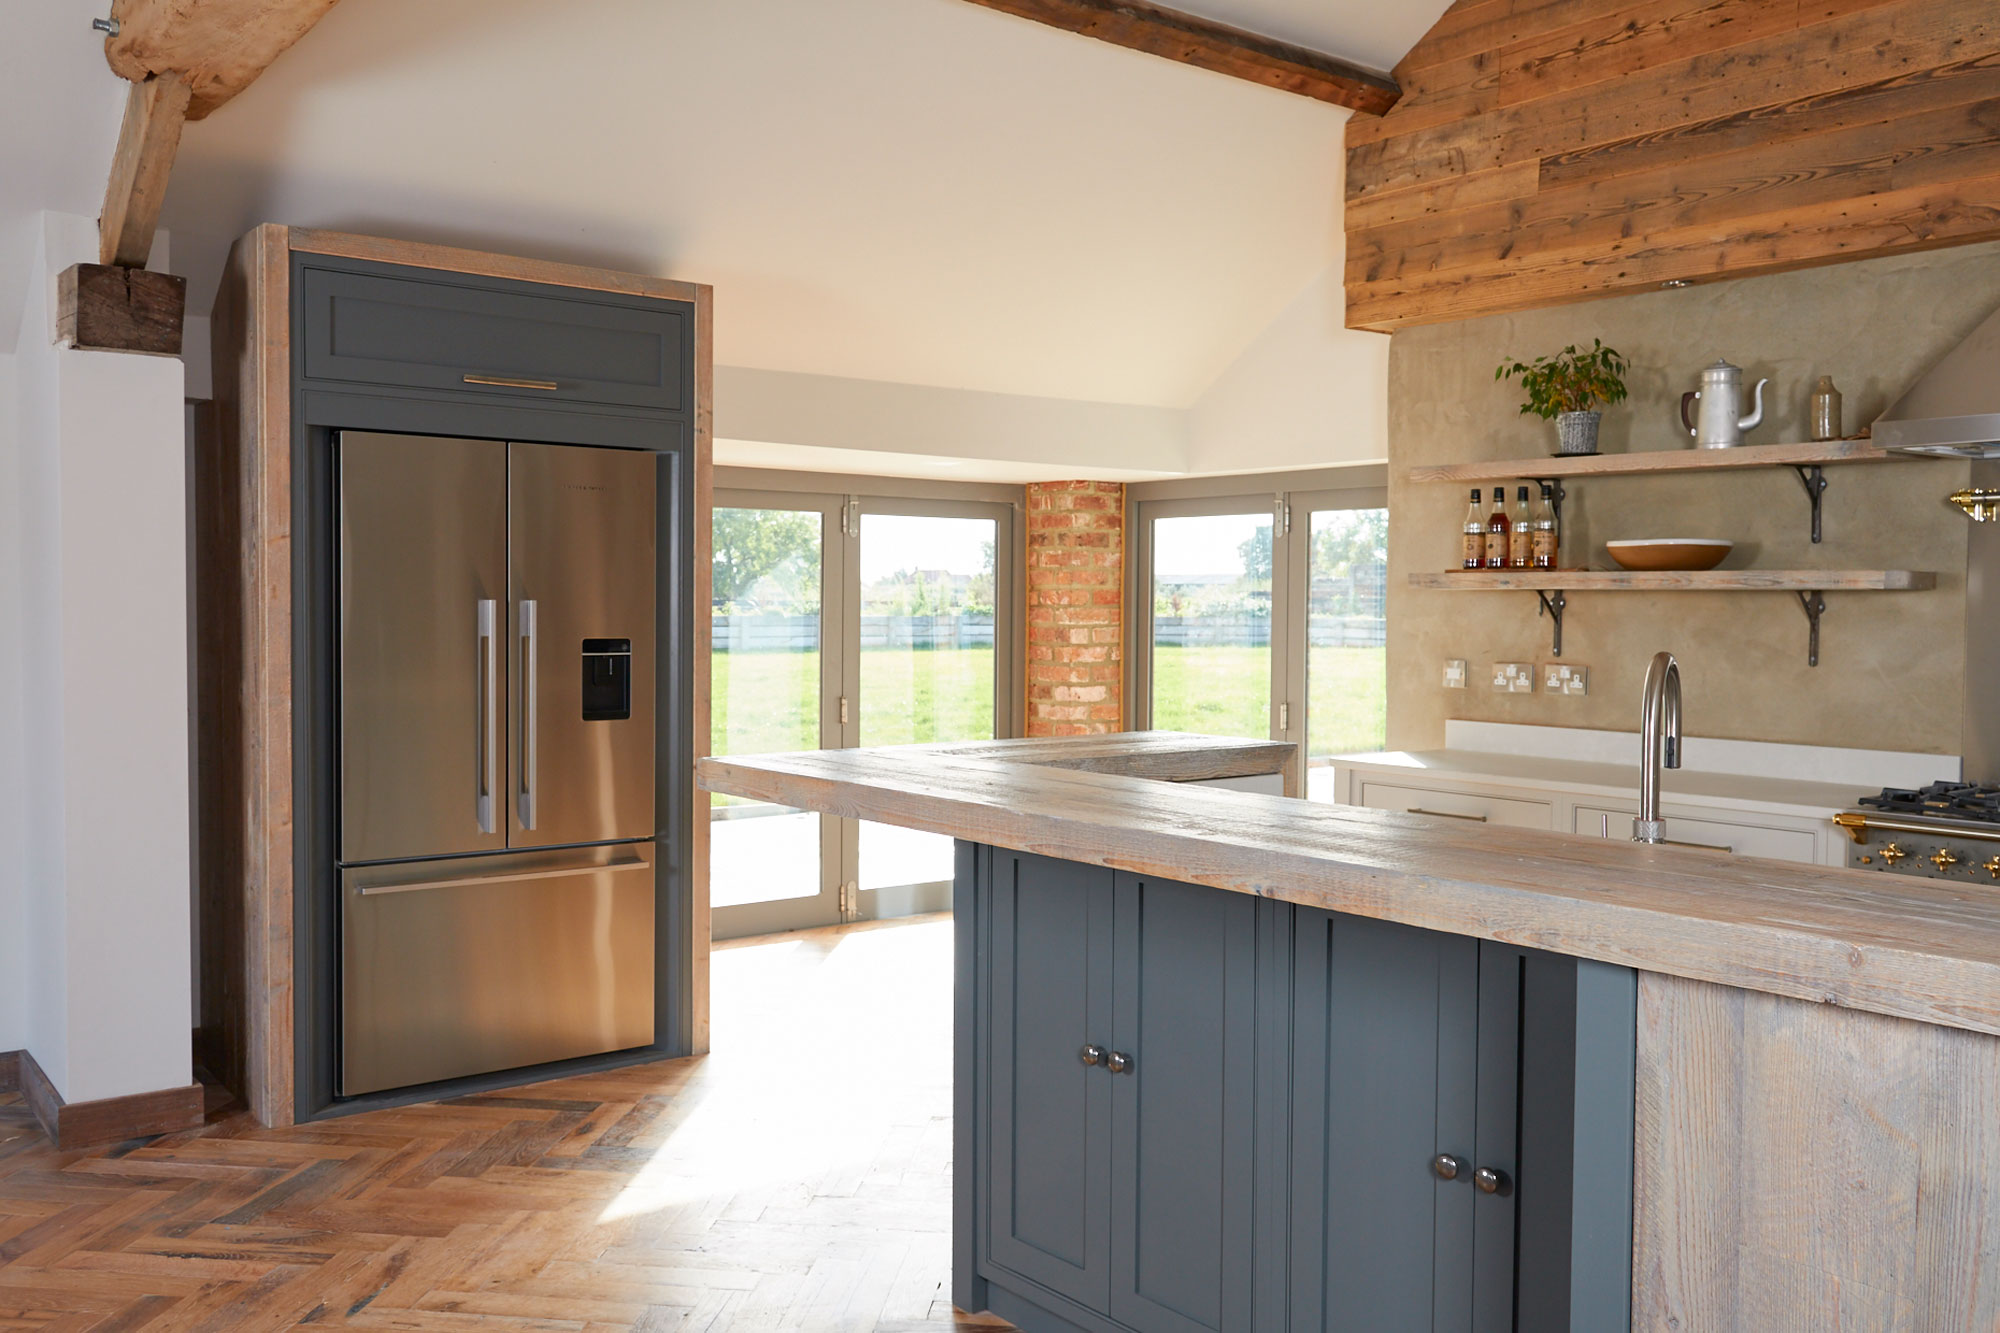 Fisher & Paykel American fridge freezer integrated in to painted unit with rustic oak posts